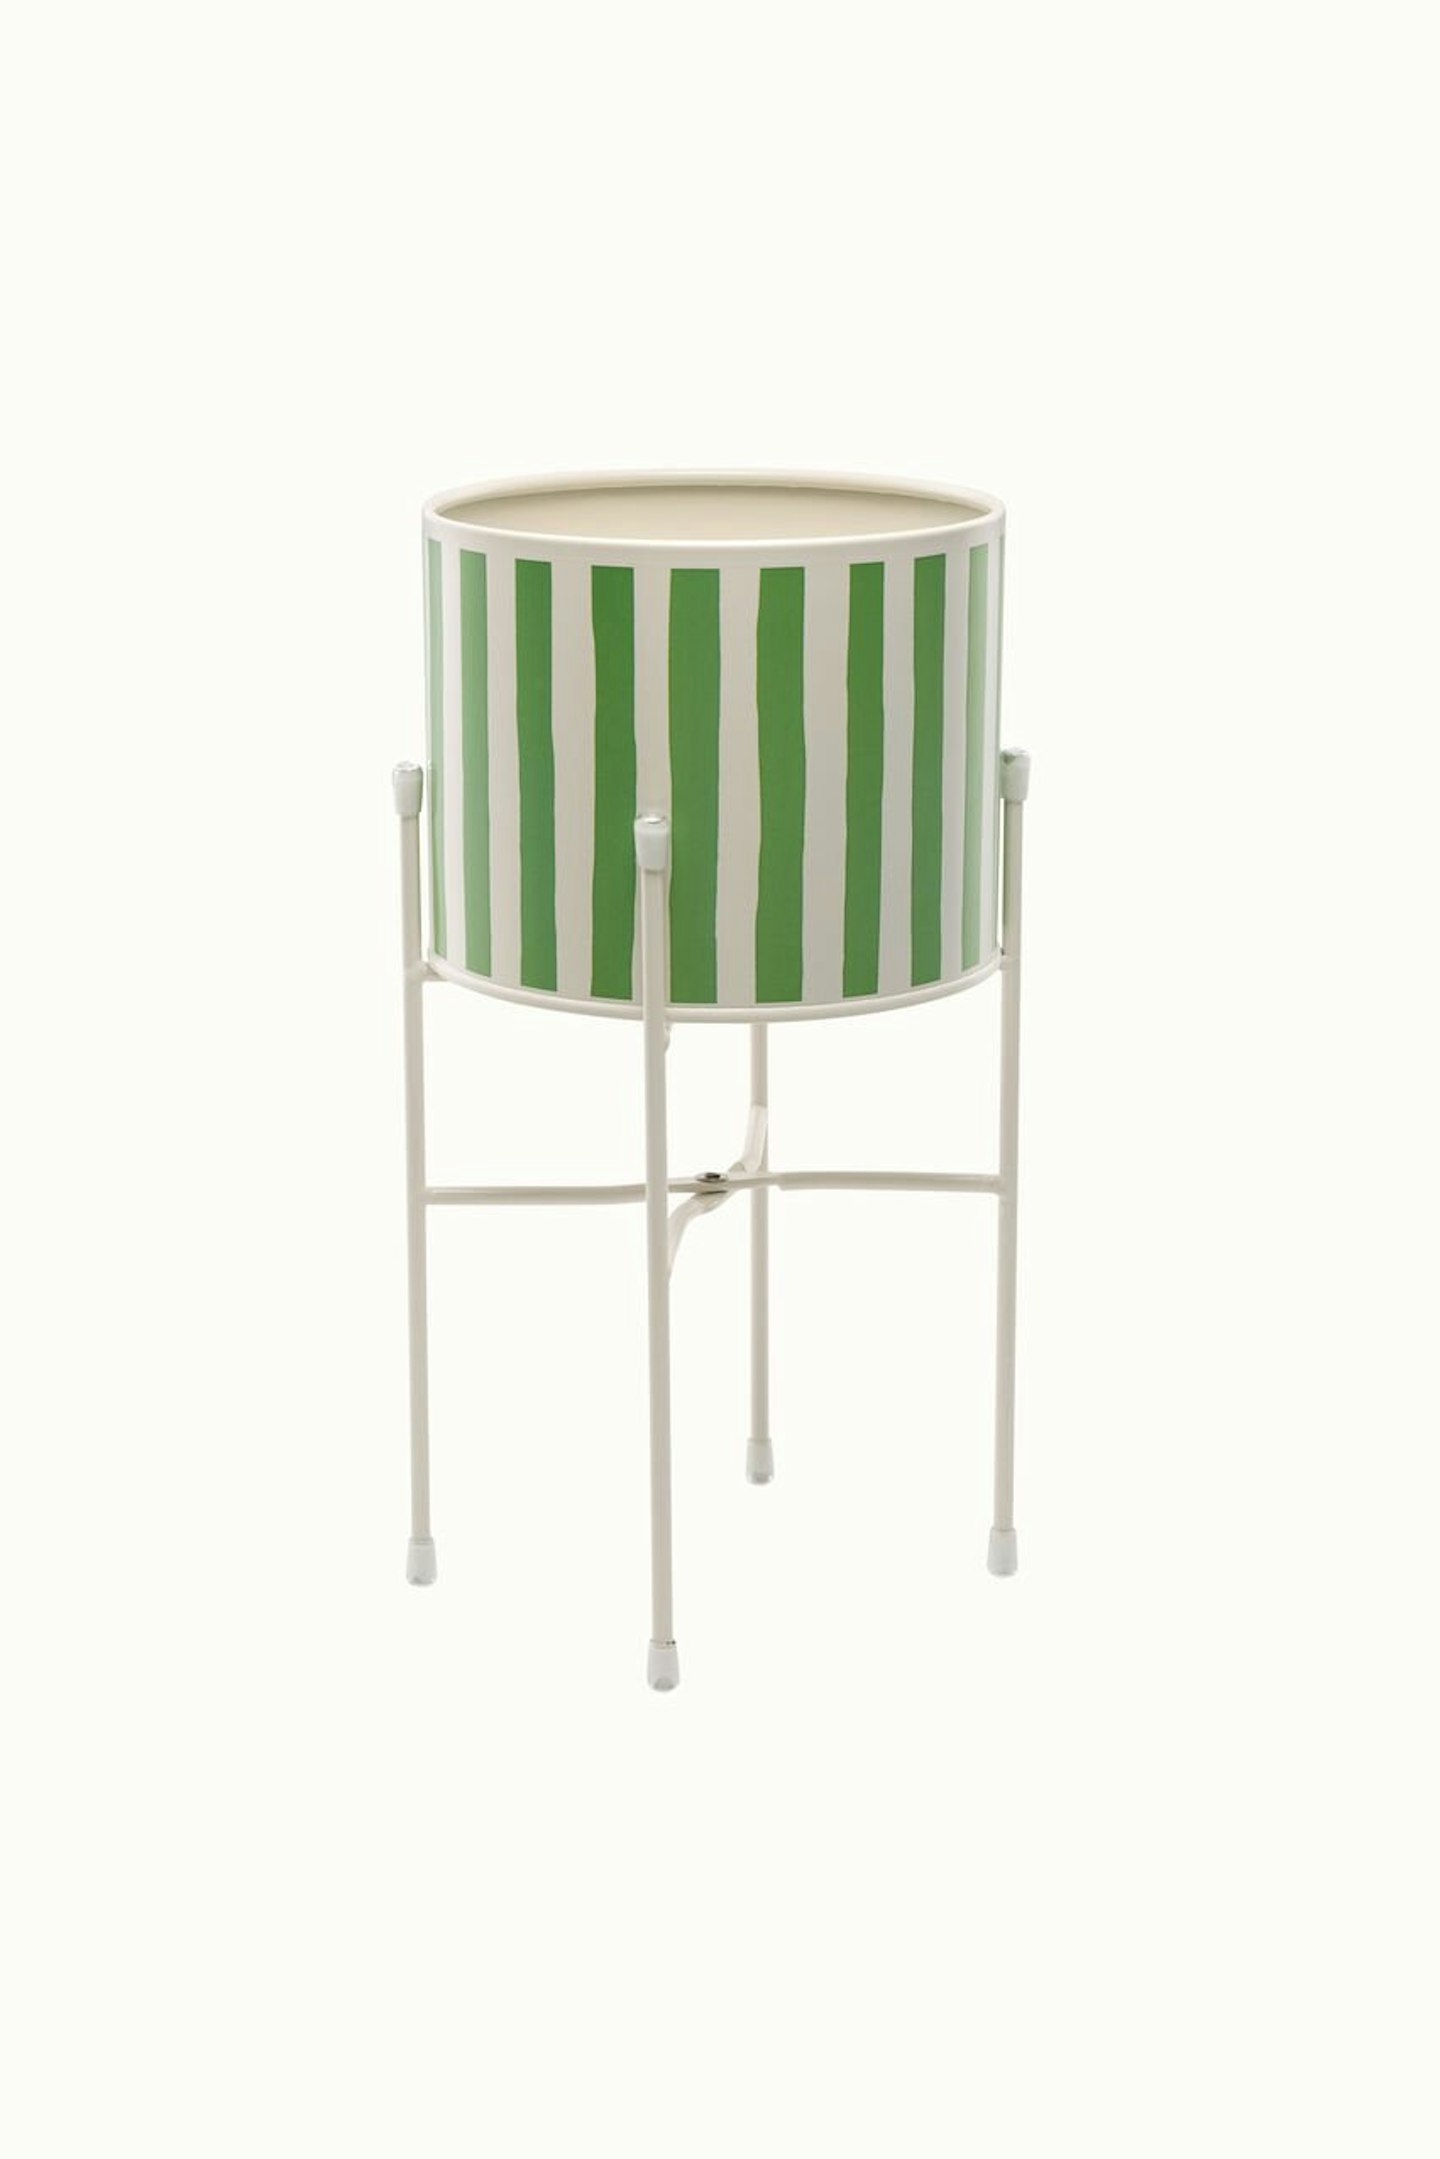 Cath Kidston, Candy Stripe Small Plant Pot & Stand, WAS £15 NOW £12